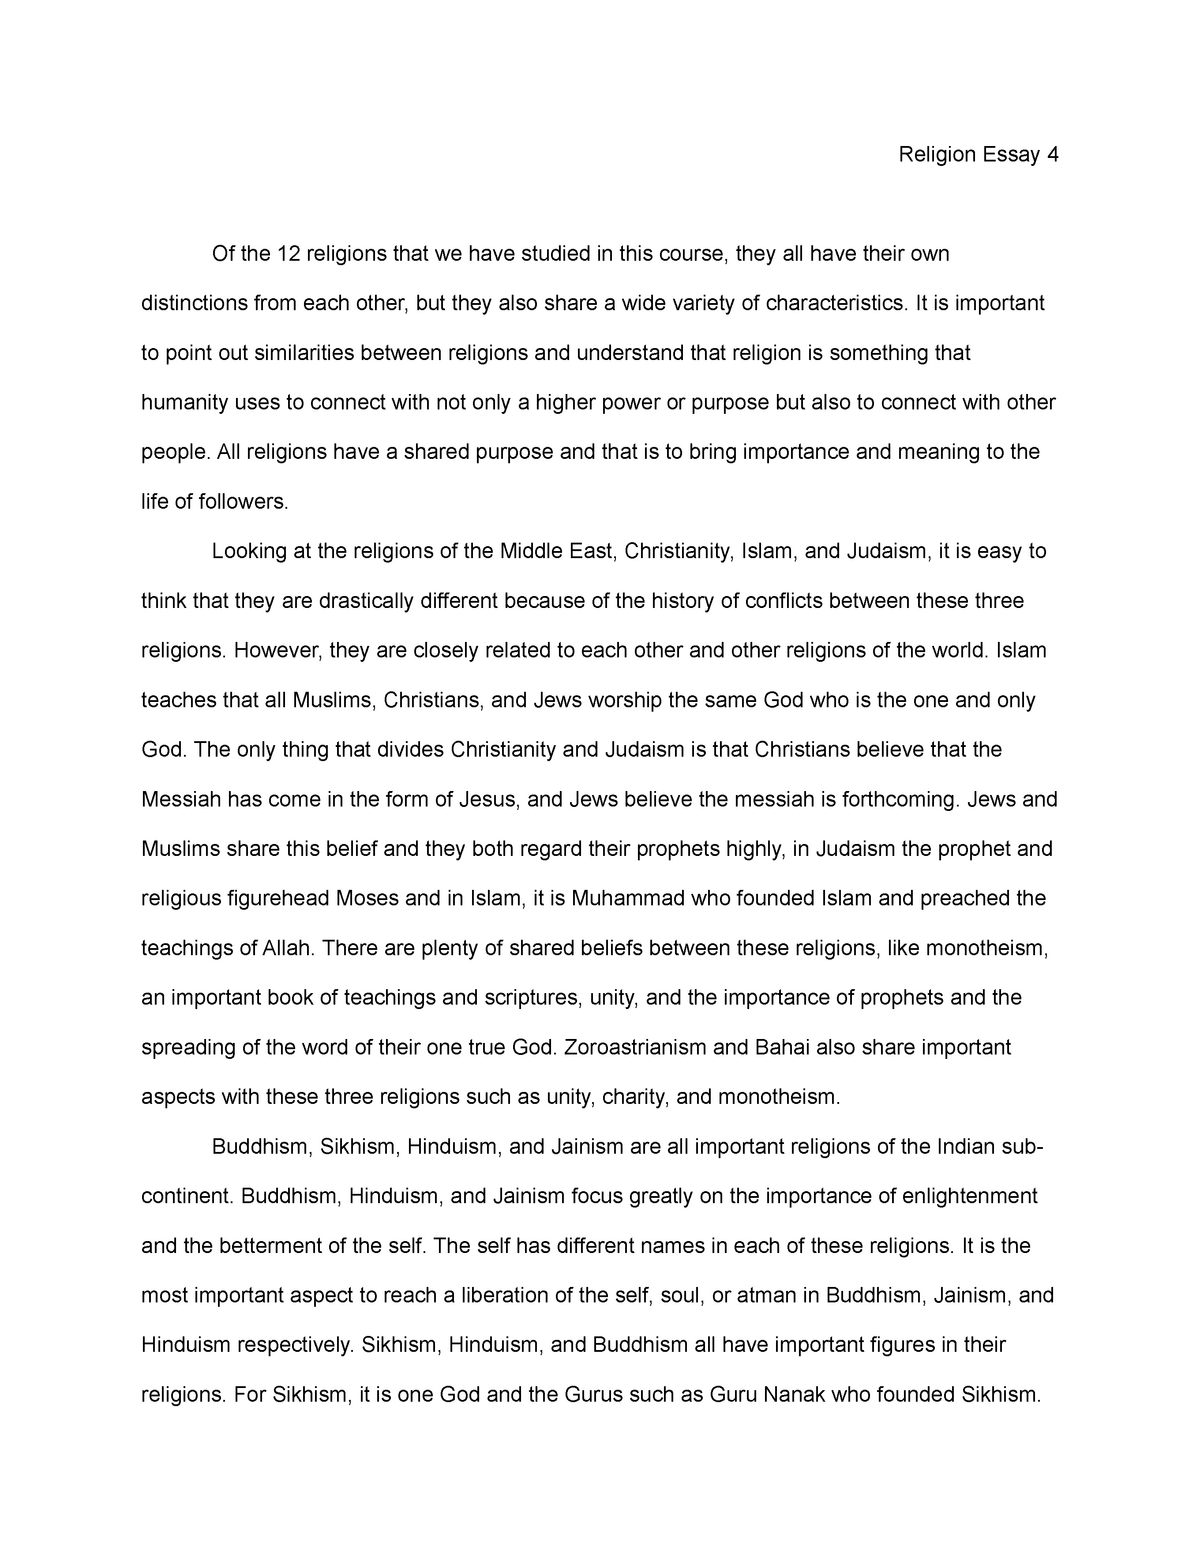 essay on our religions